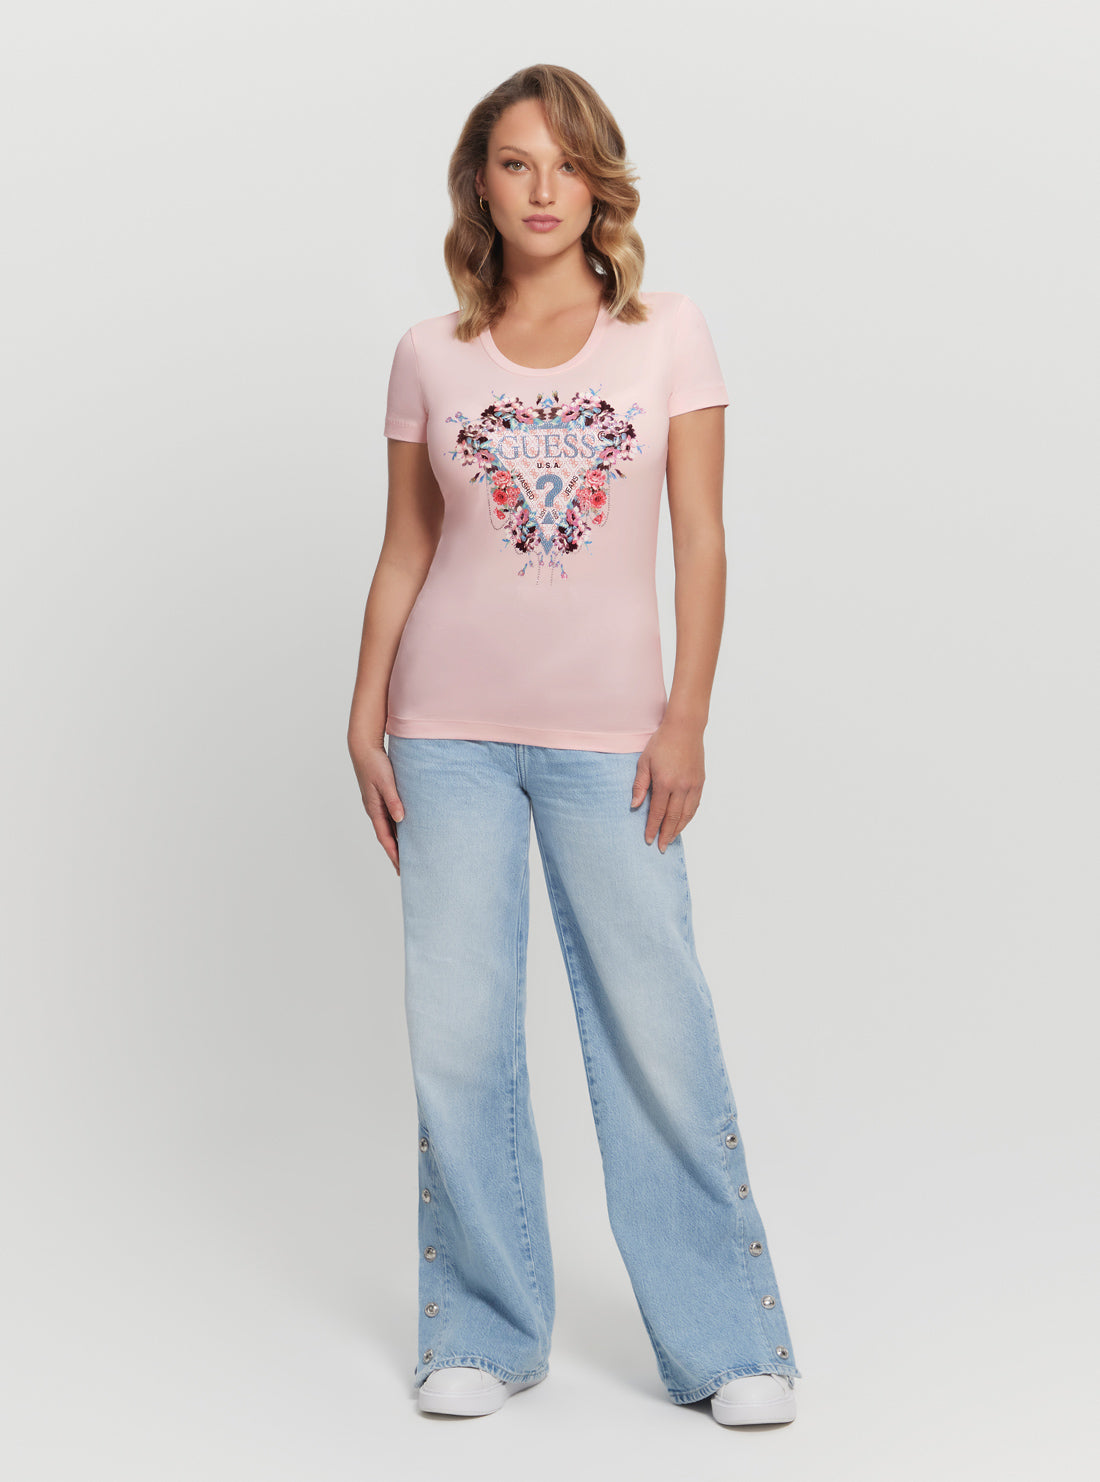 GUESS Pink Flowers Triangle T-Shirt  full view